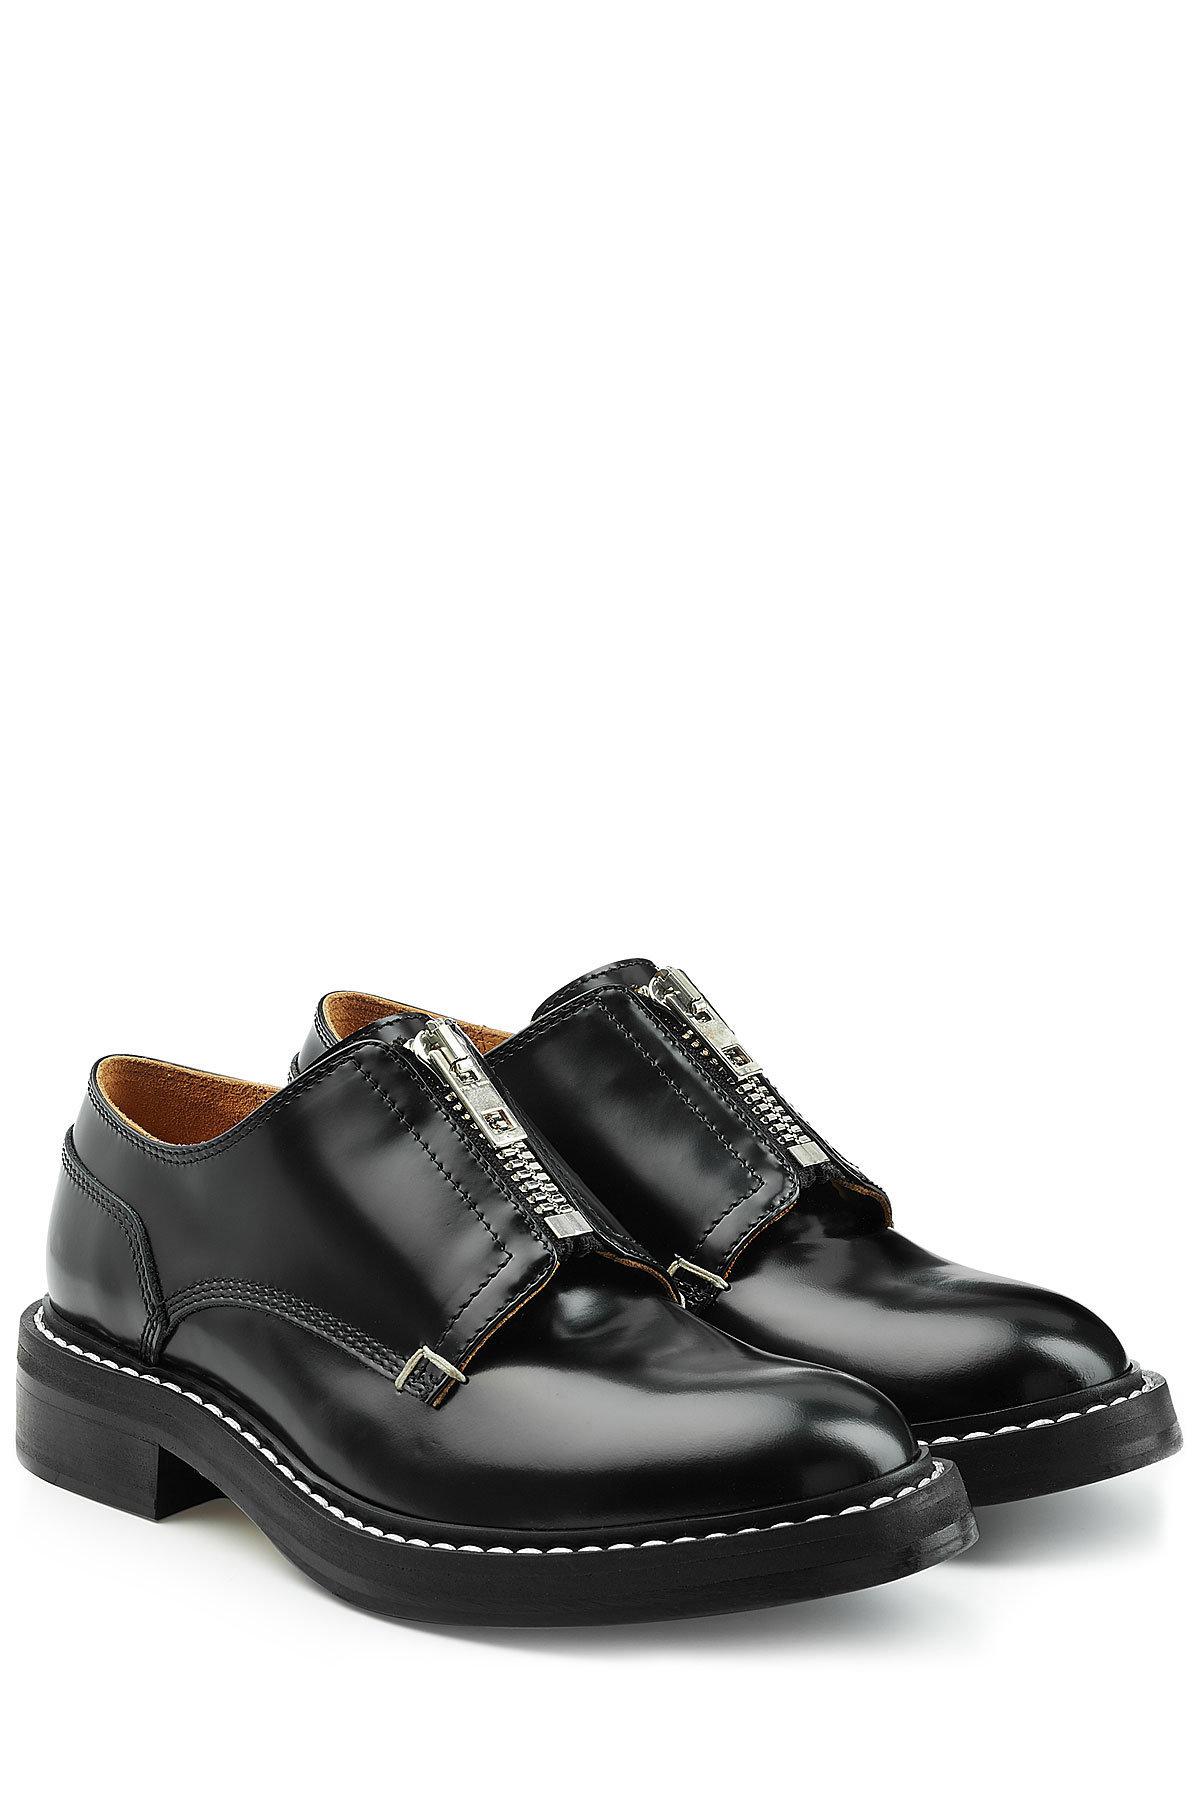 Lyst - Rag & Bone Leather Shoes With Zippers in Black